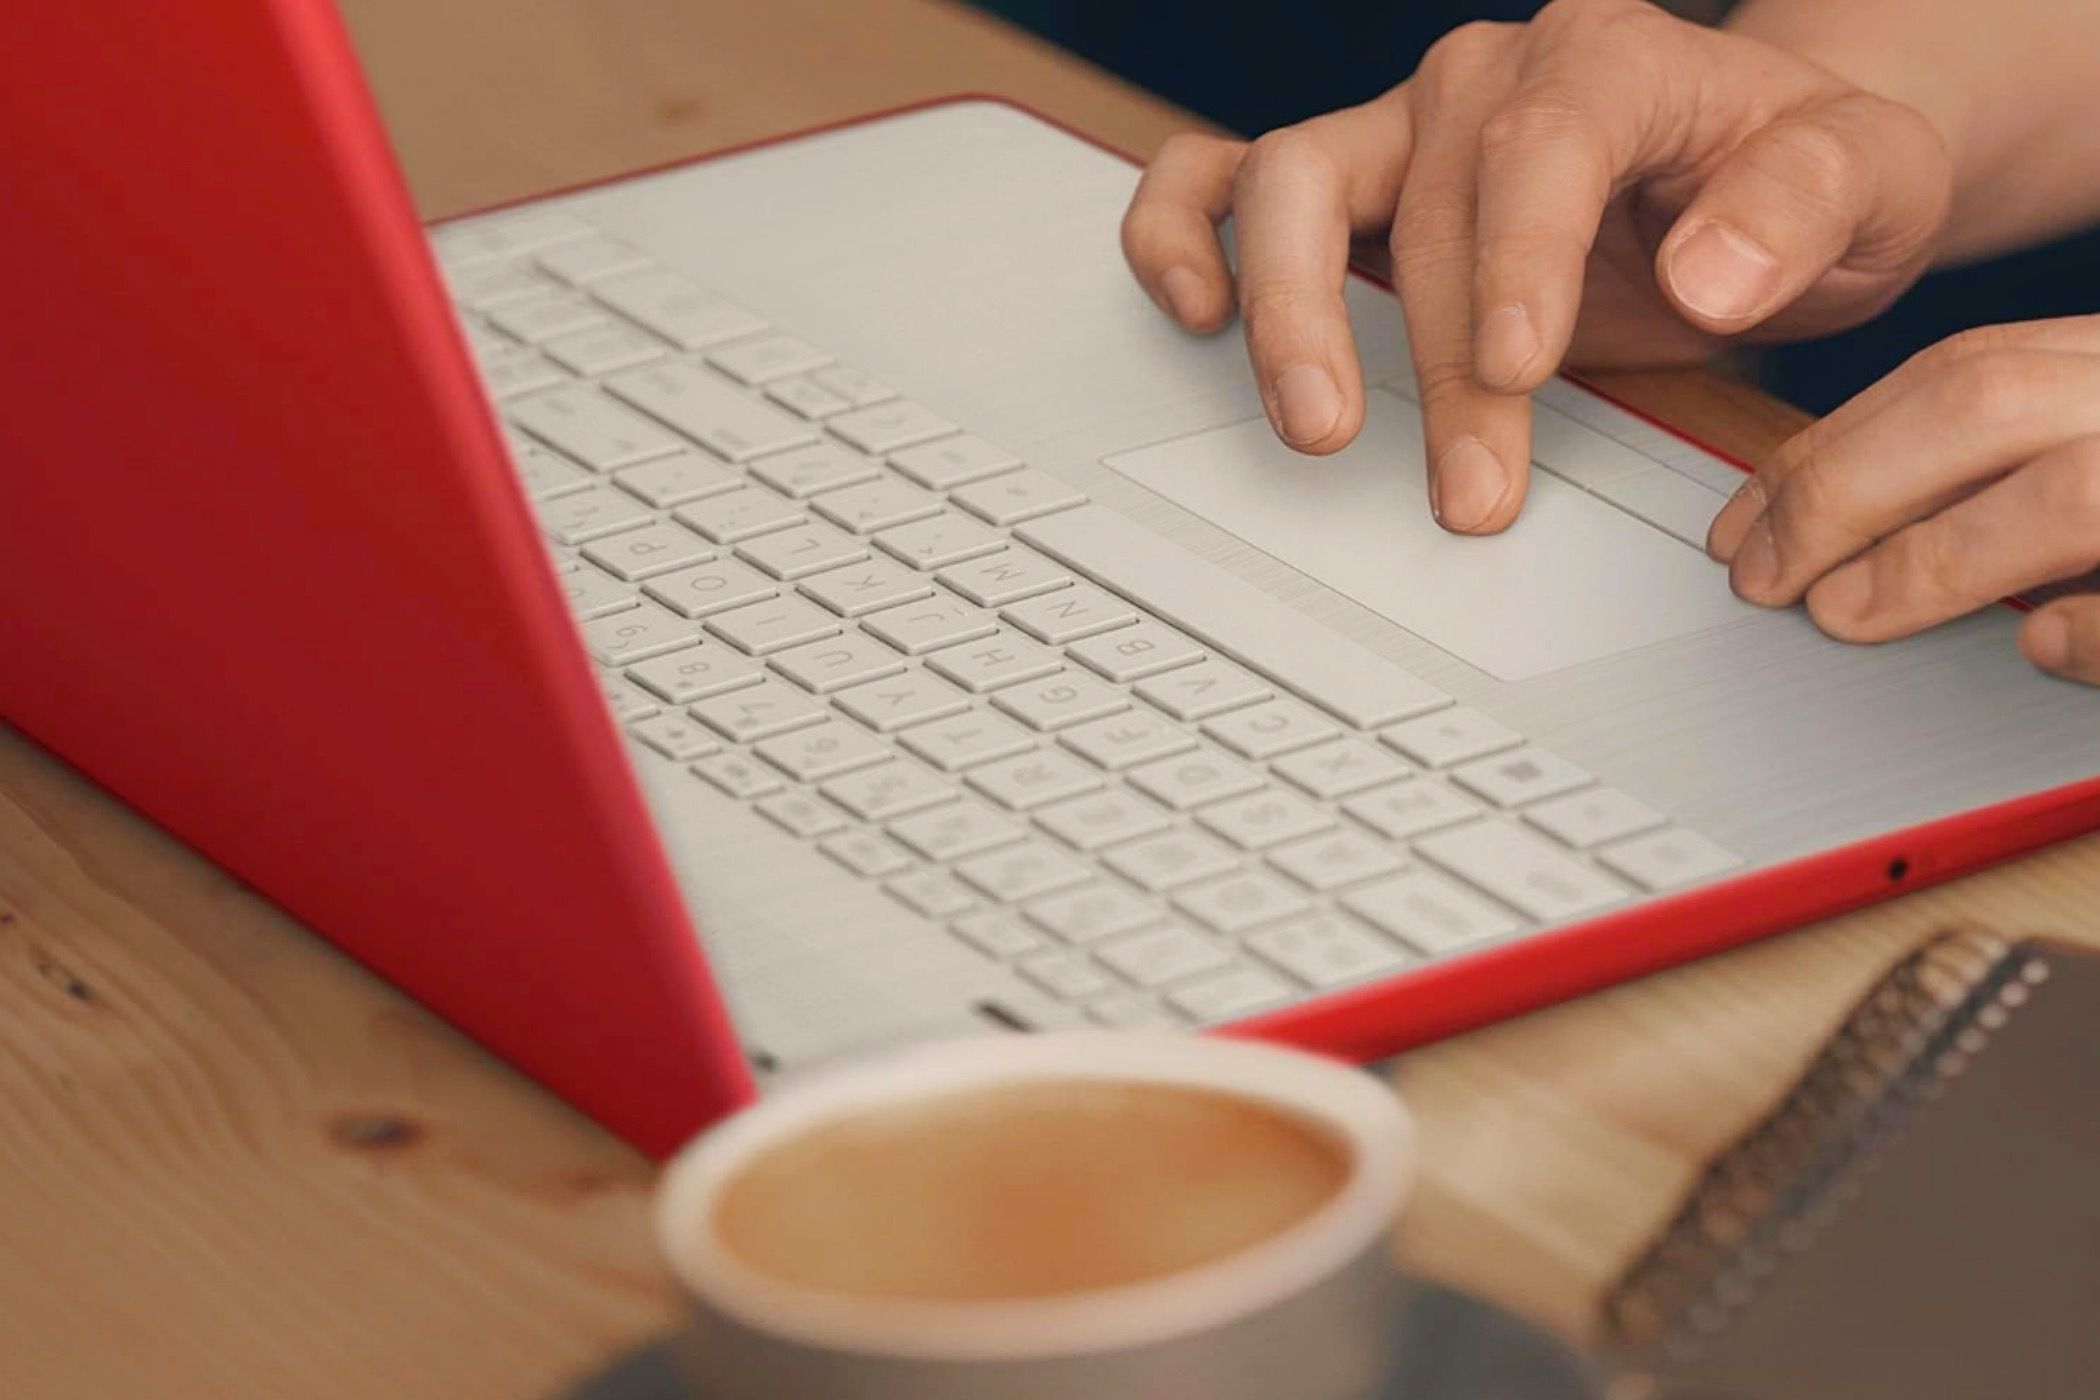 An image of a person's hands using the HP Pavilion 15.6-inch Laptop with a cup of coffee in the foreground.